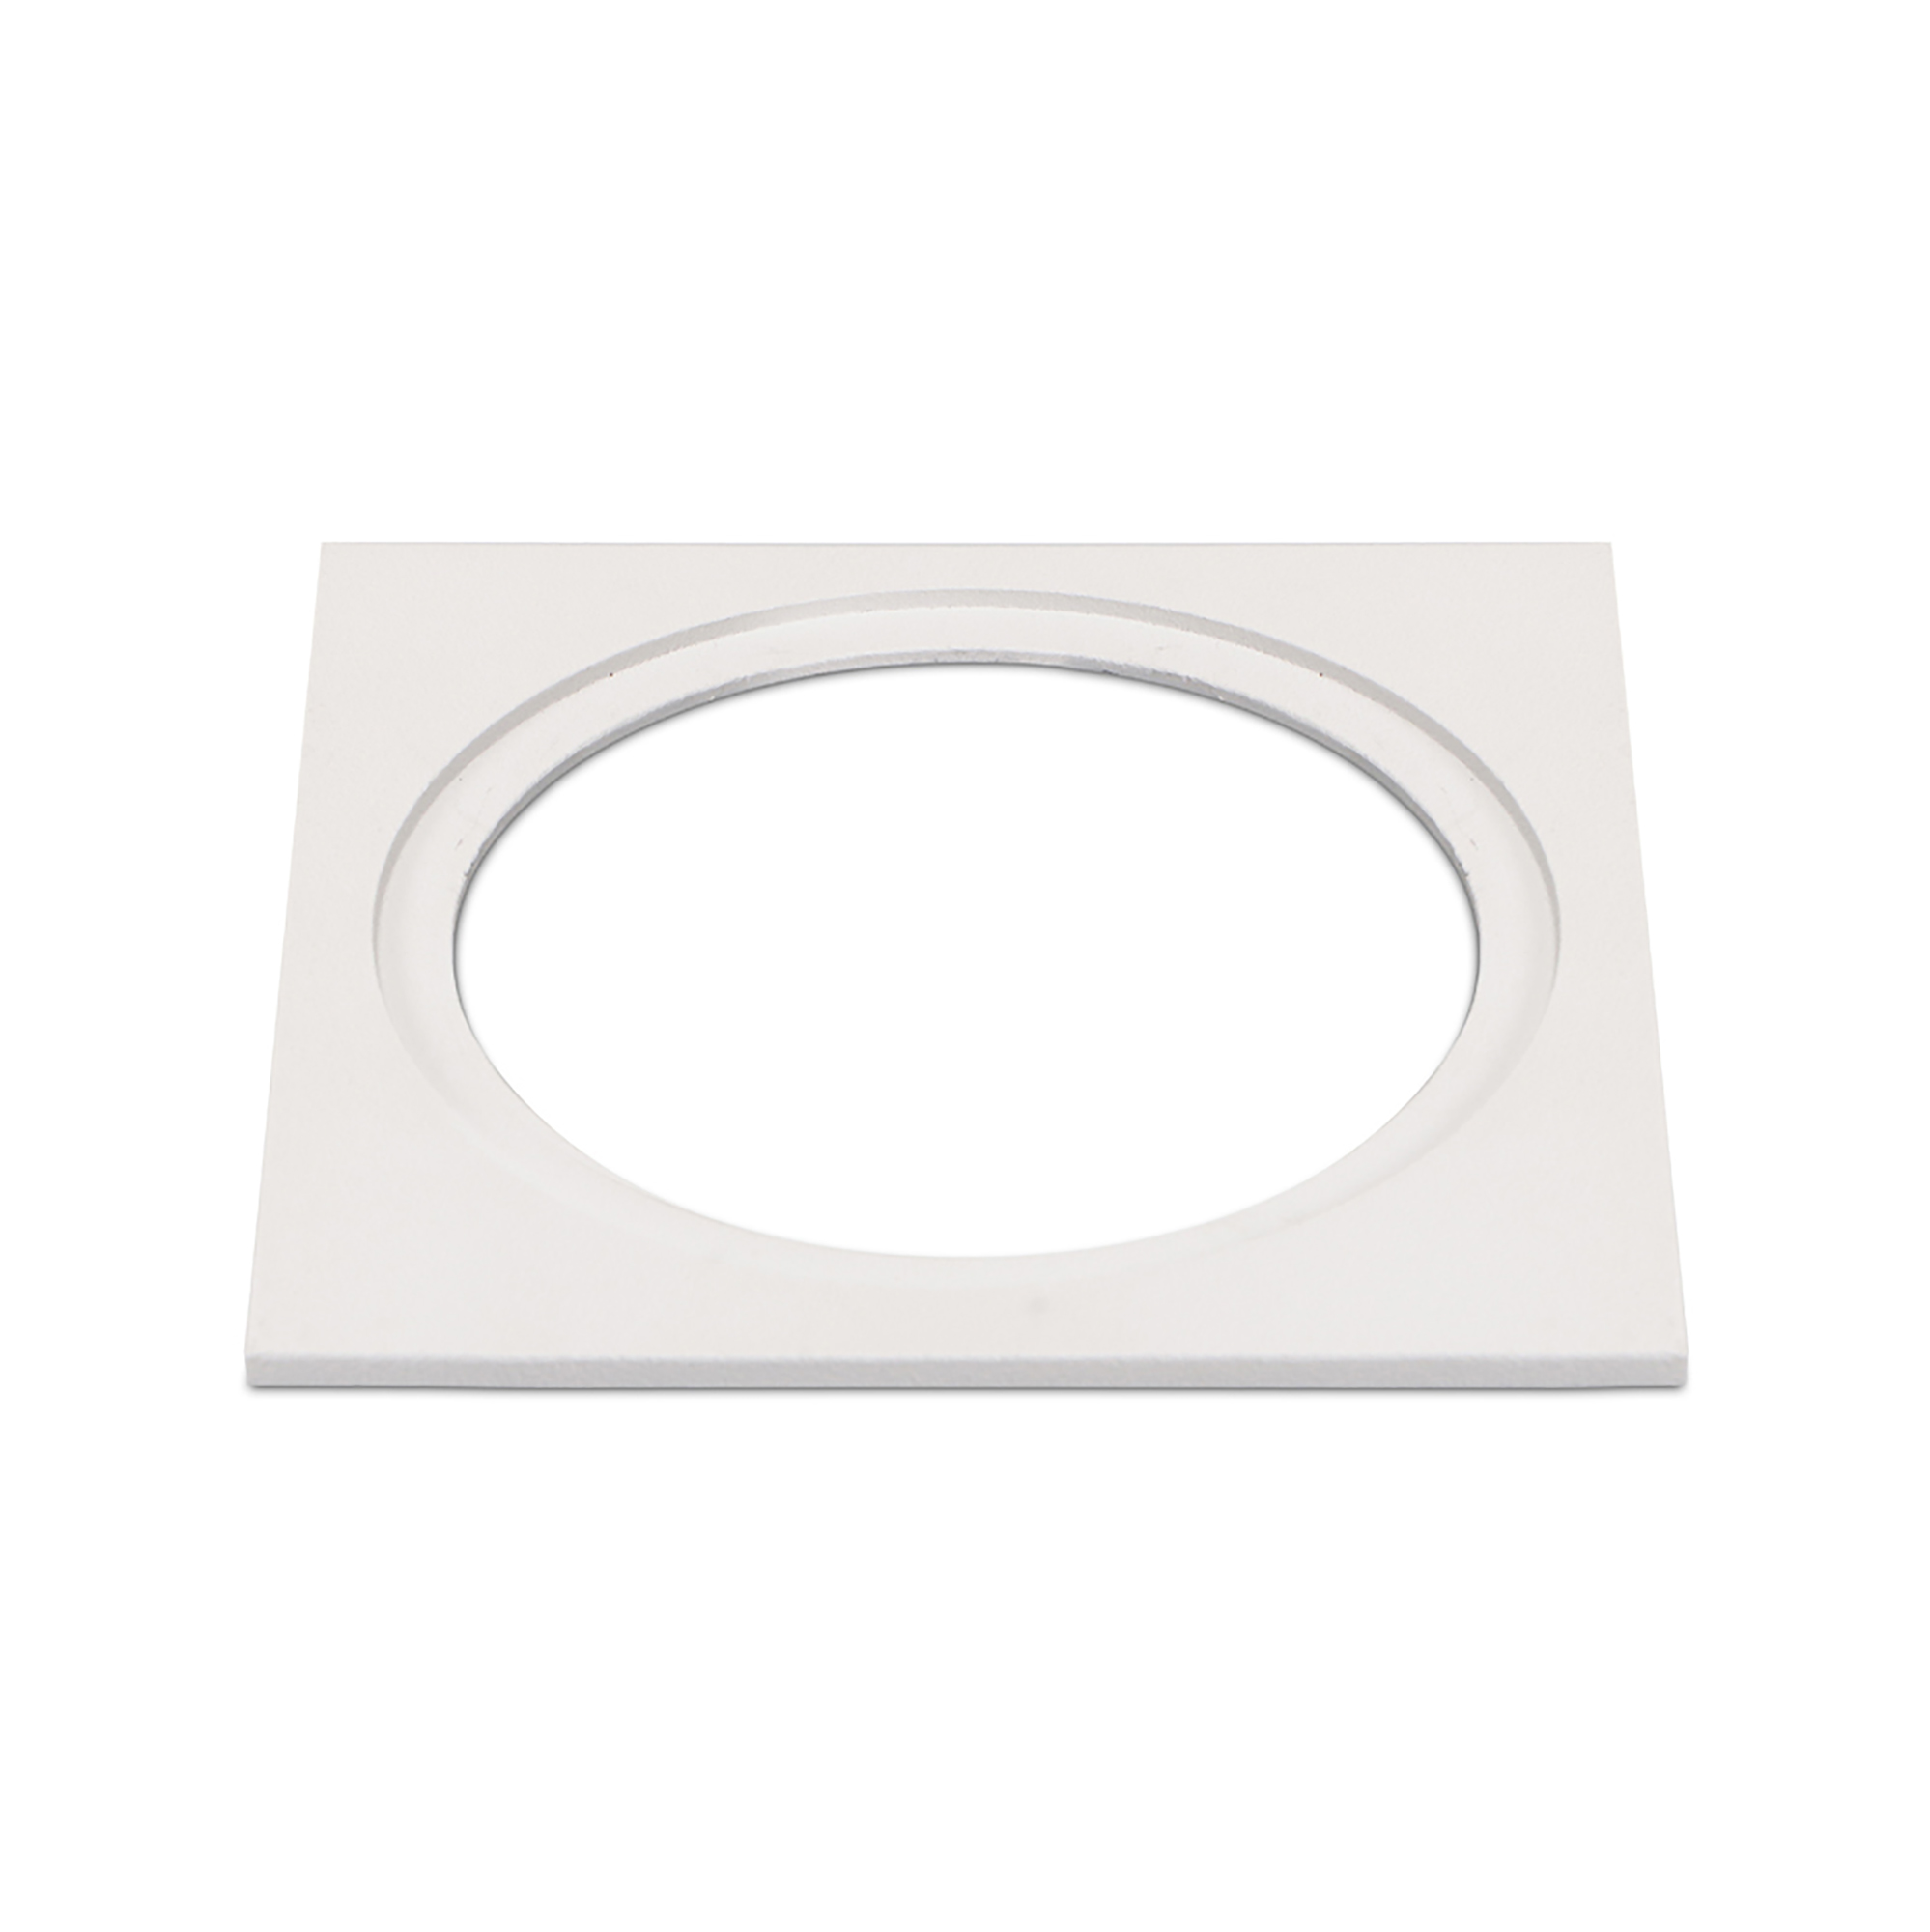 DX210045  Bania S 90x90mm White Square Frame Suitable For Bania; Bania A and Bazi Downlight